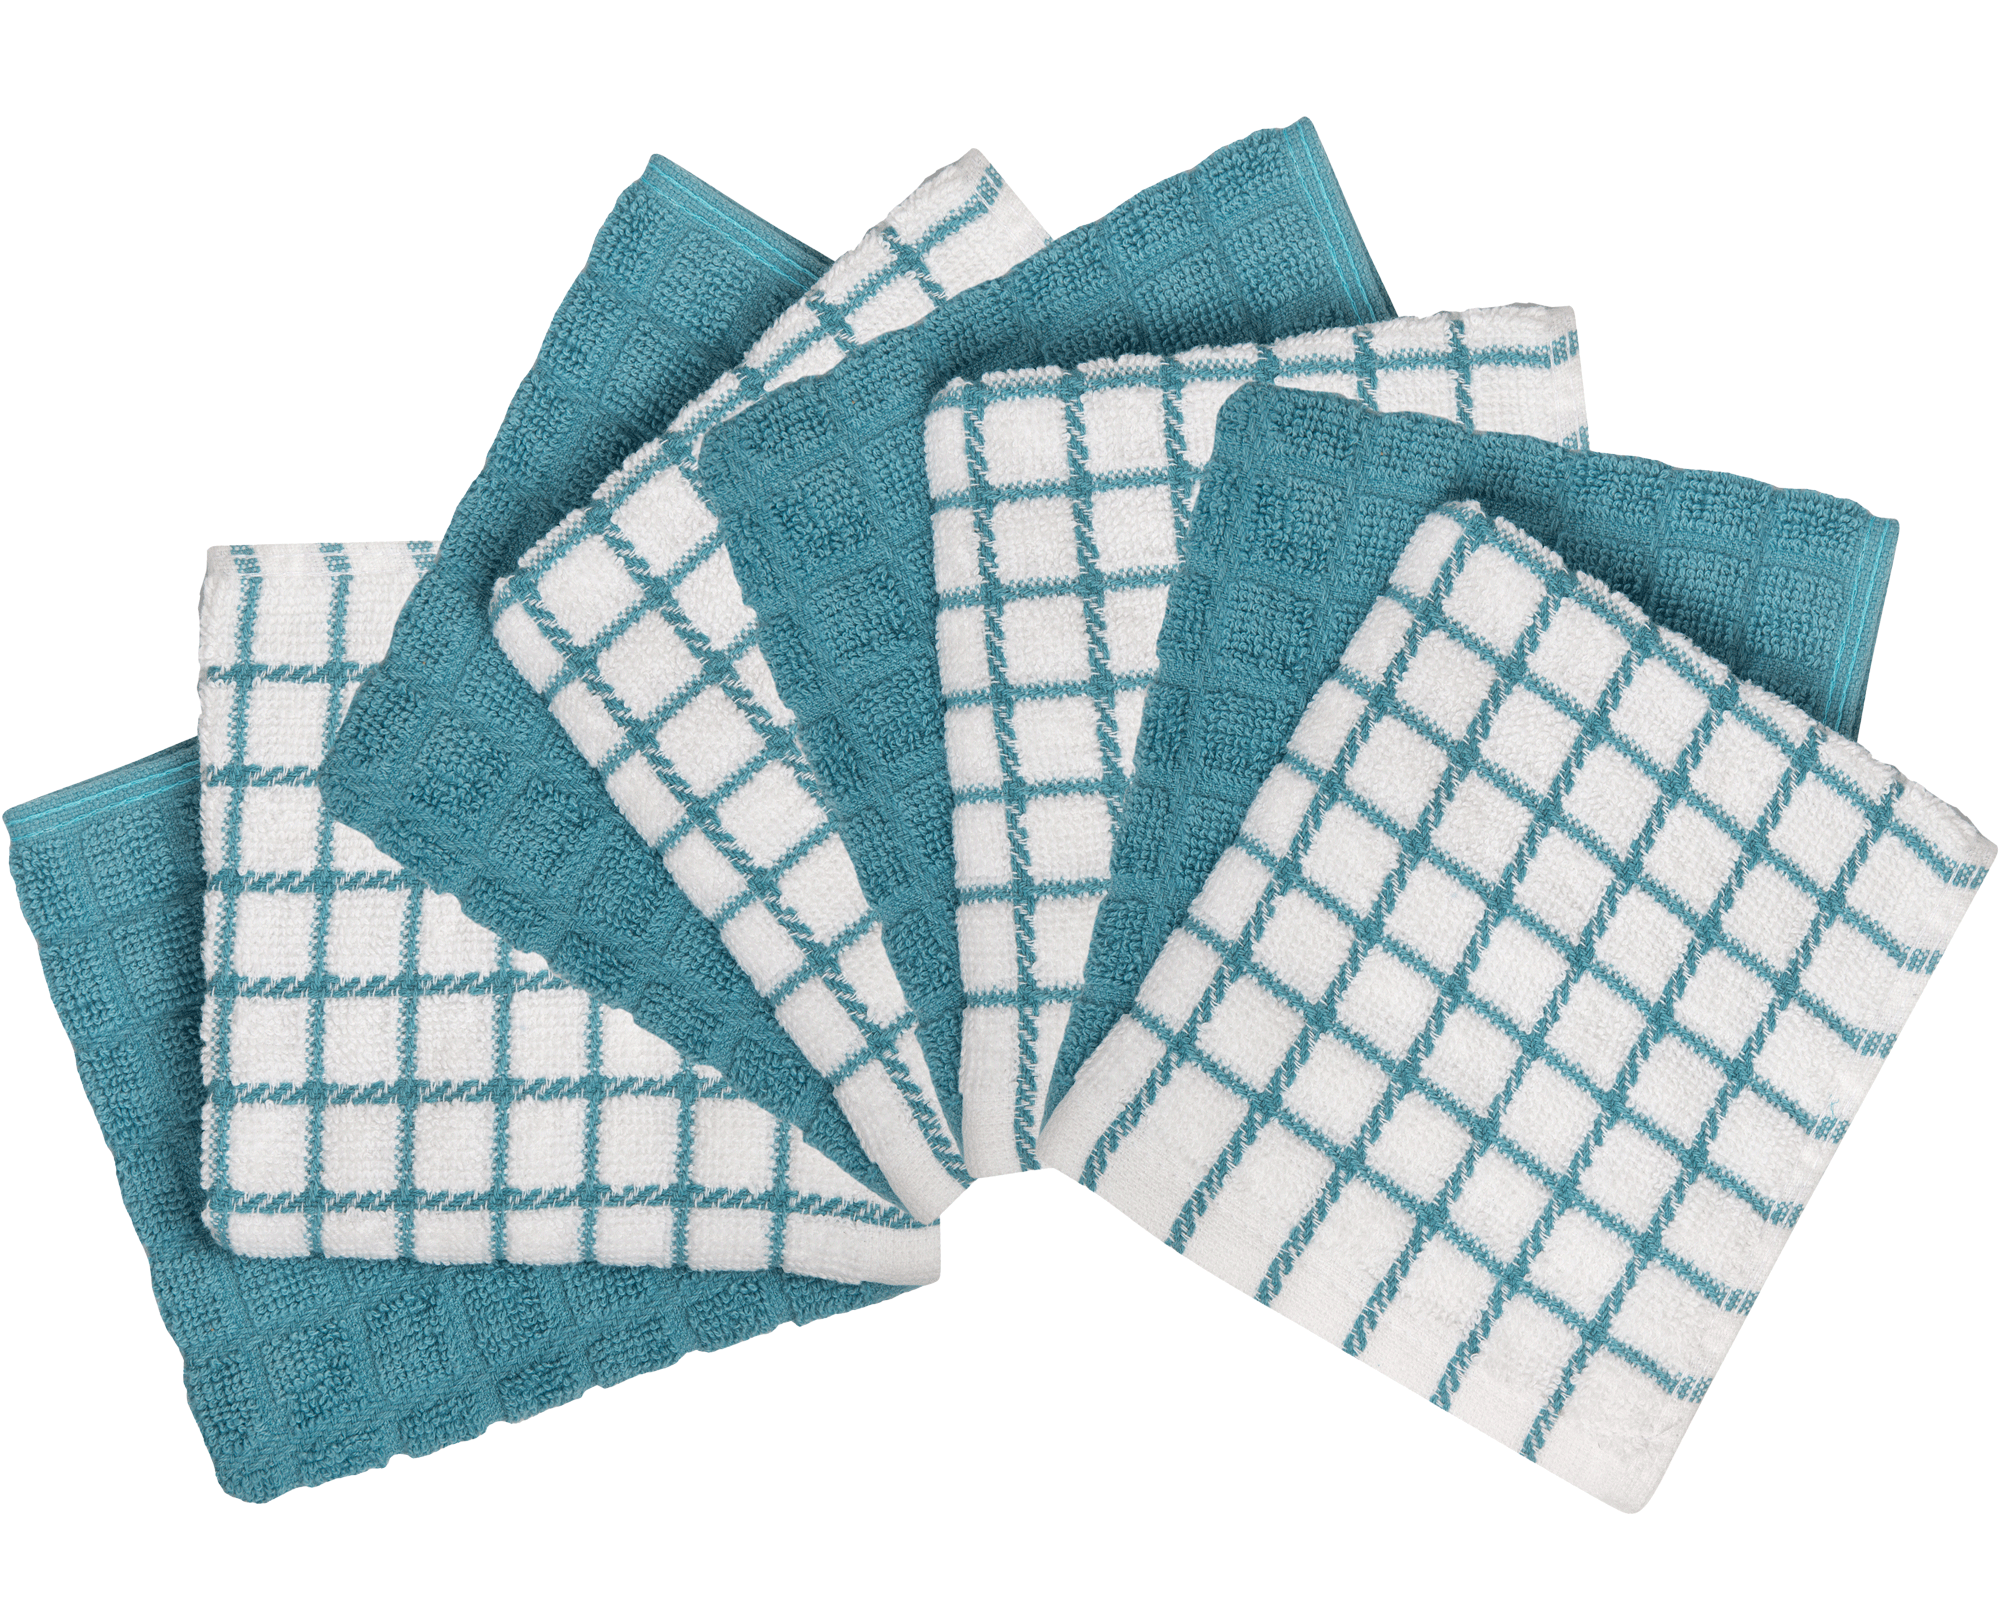 Shop Small Box Yarn Dyed Kitchen Towels: Quality and Style! – Bumble Towels